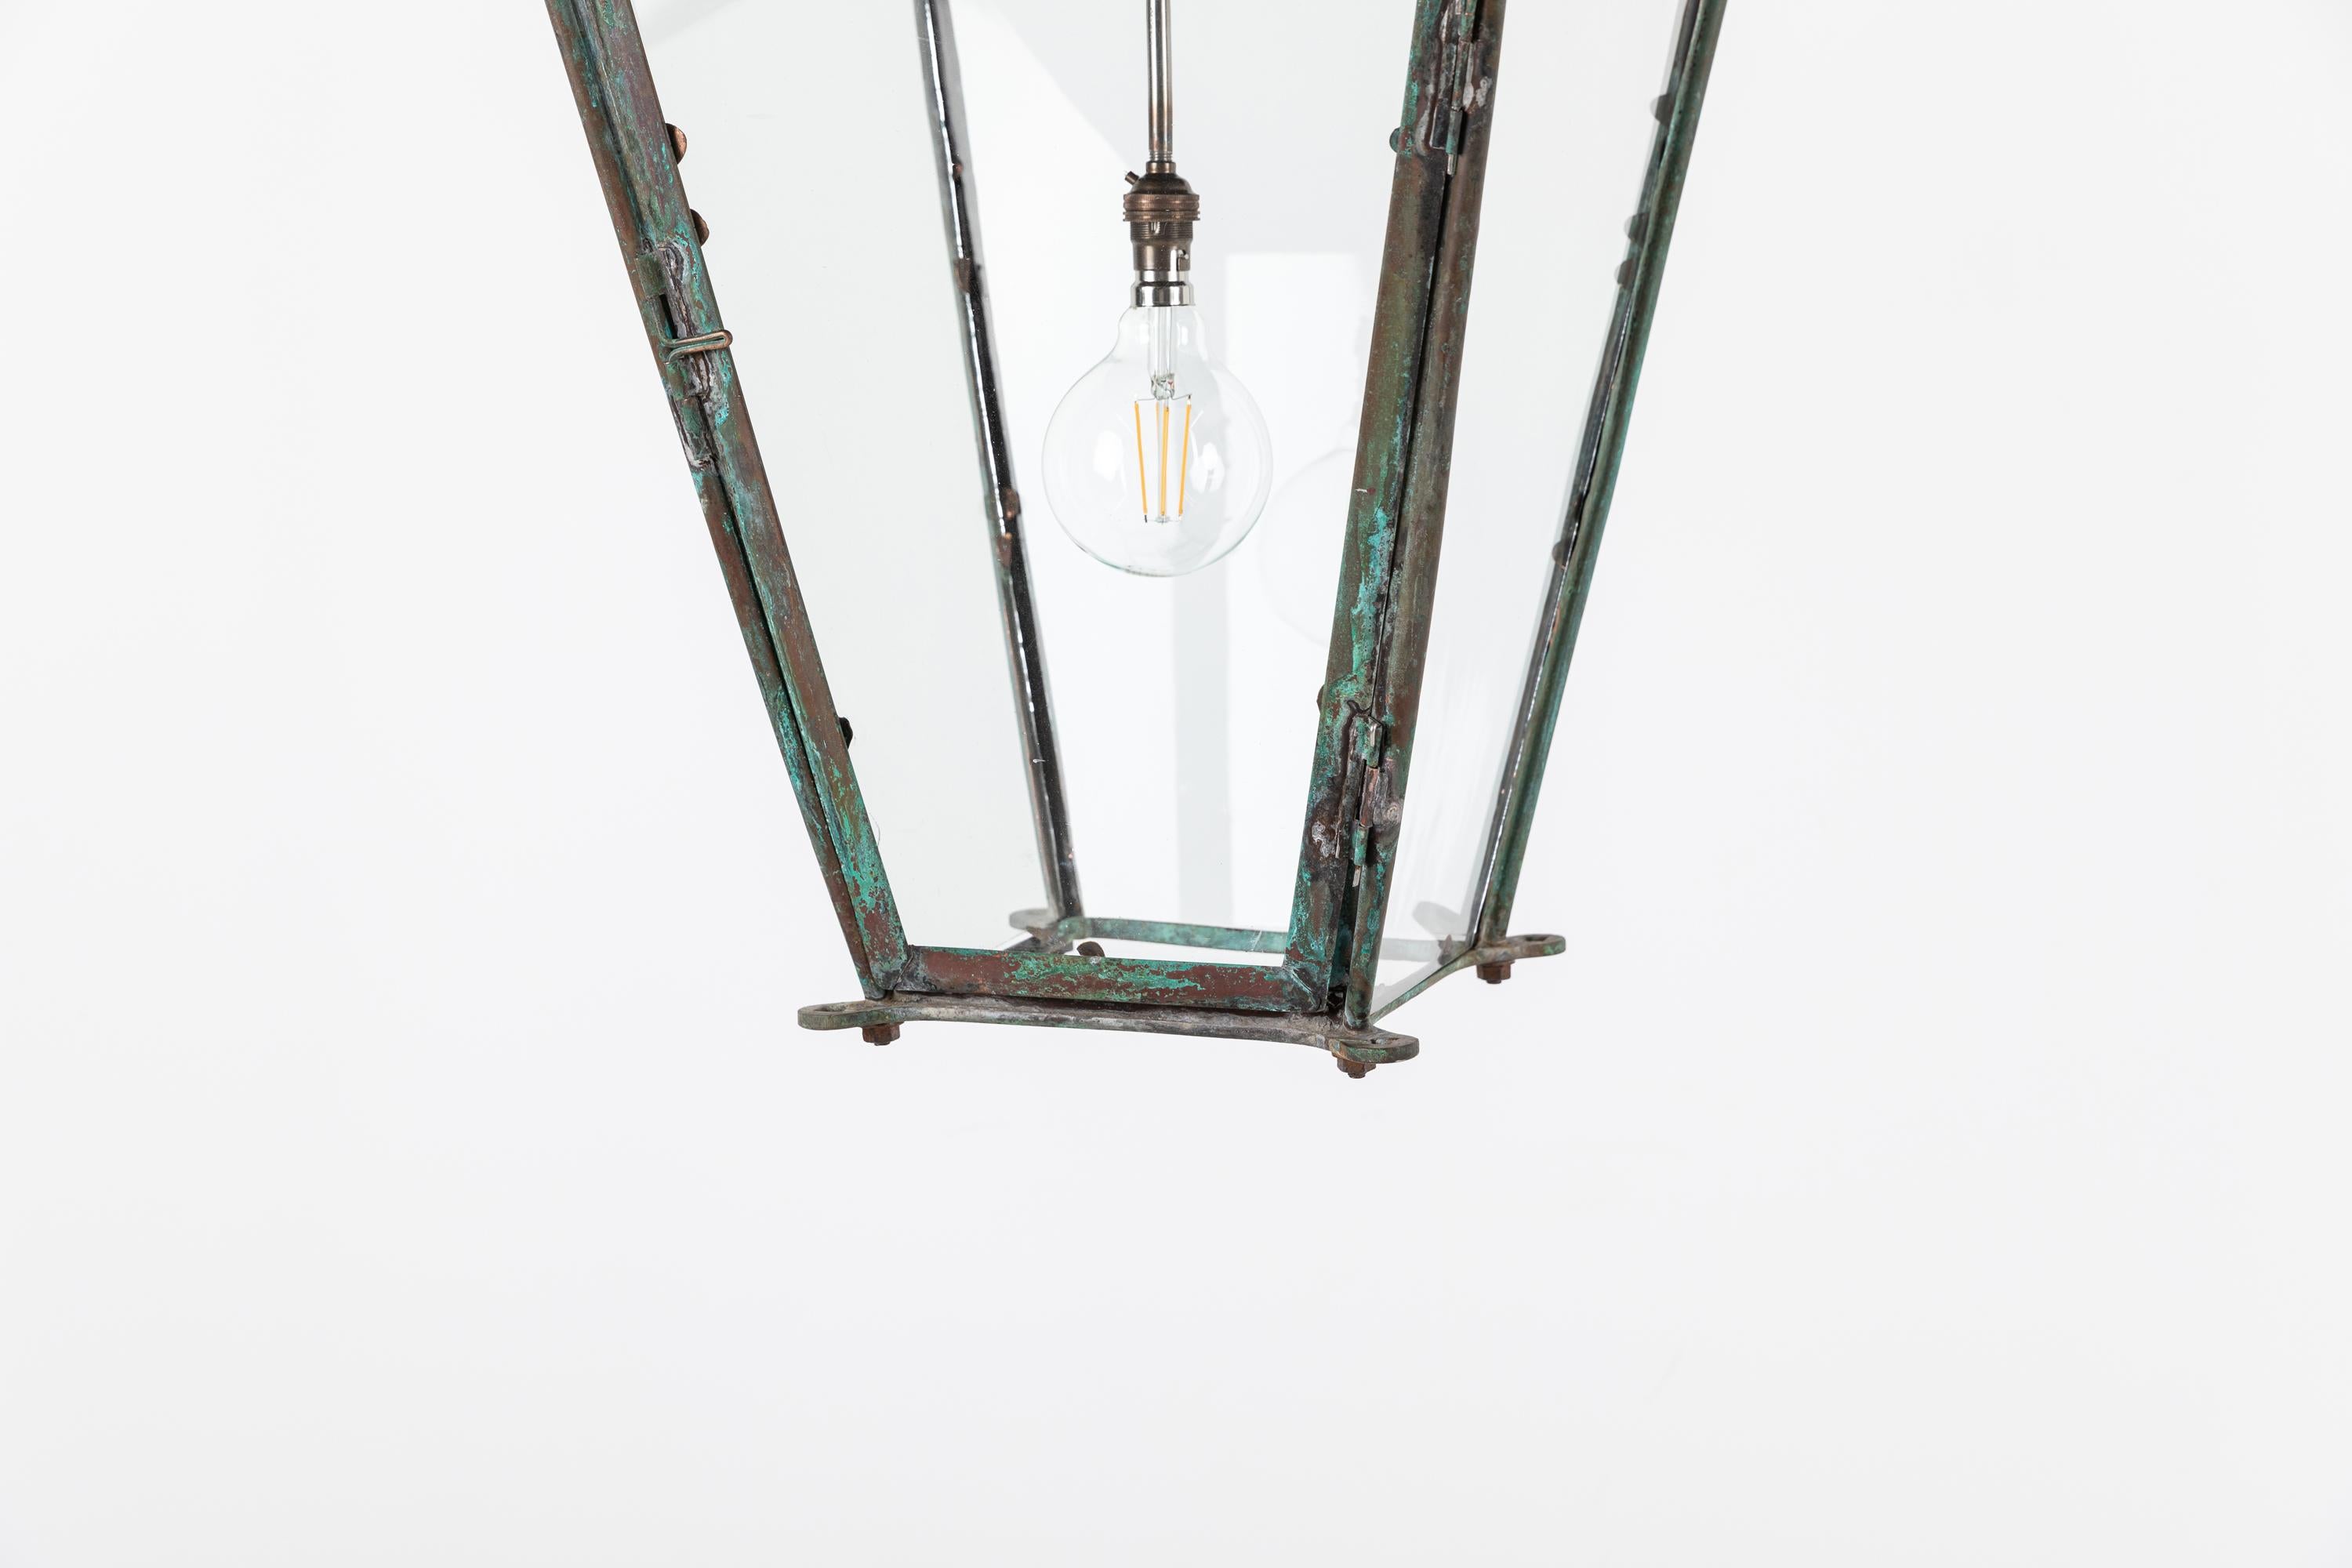 Copper street lantern with natural verdigris made in England. c.1860.

Dating to the mid-late 19th Century with a beautiful natural verdigris patina and original rolled glass. Small, descreet adaption allowing the lantern to be hung from a